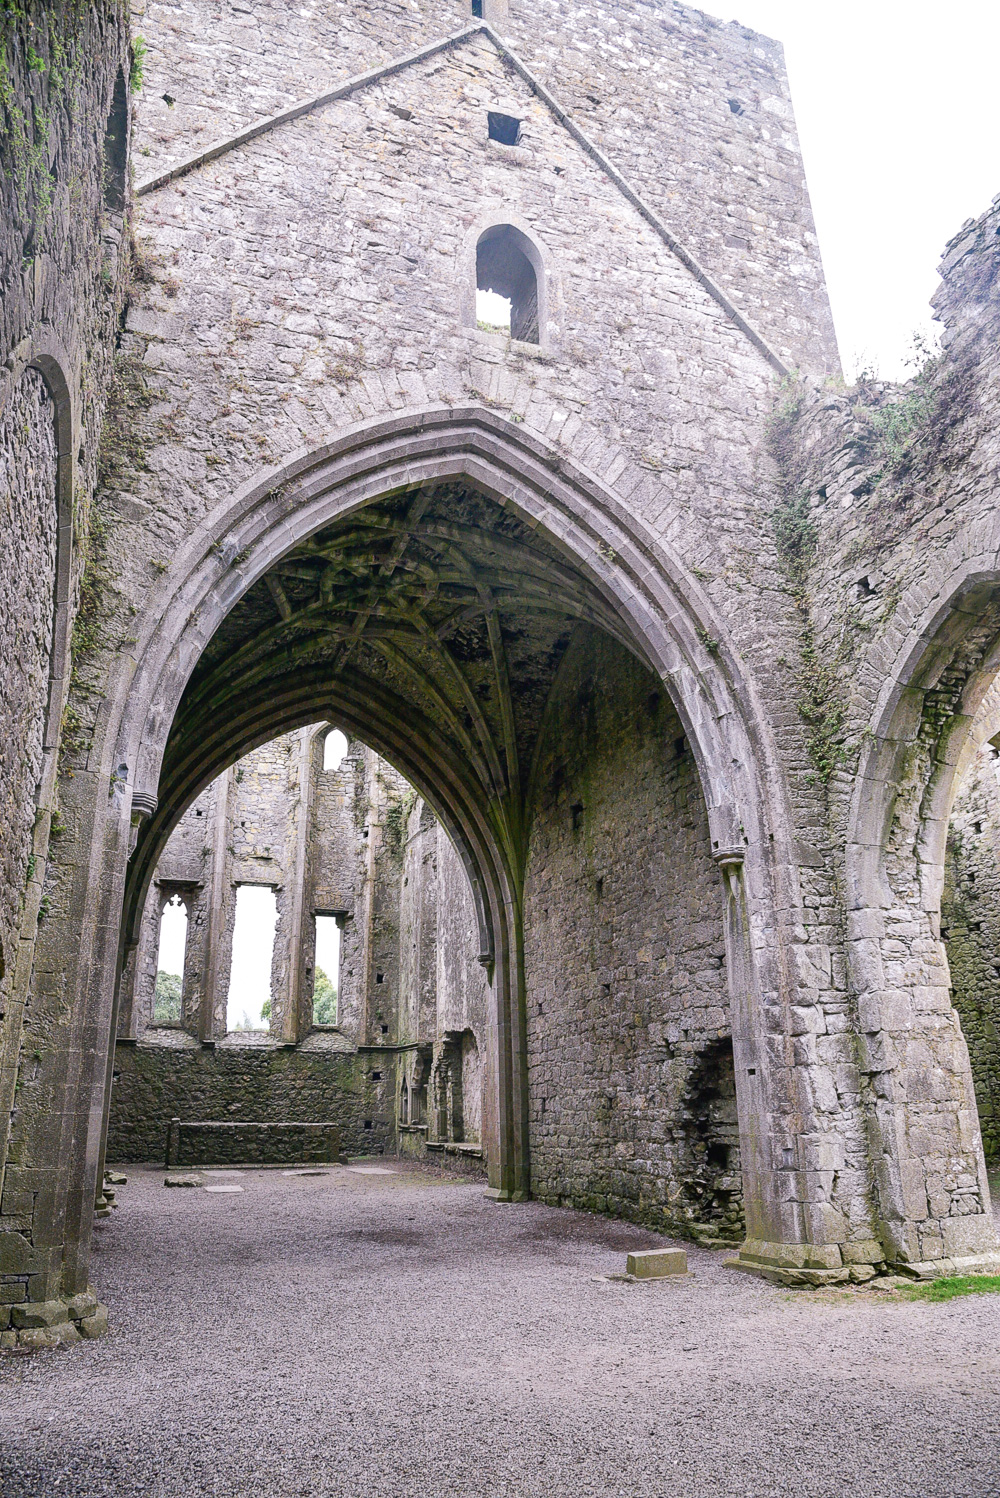 Historic ruins in a deserted Irish abbey outside of Kilkenny. 